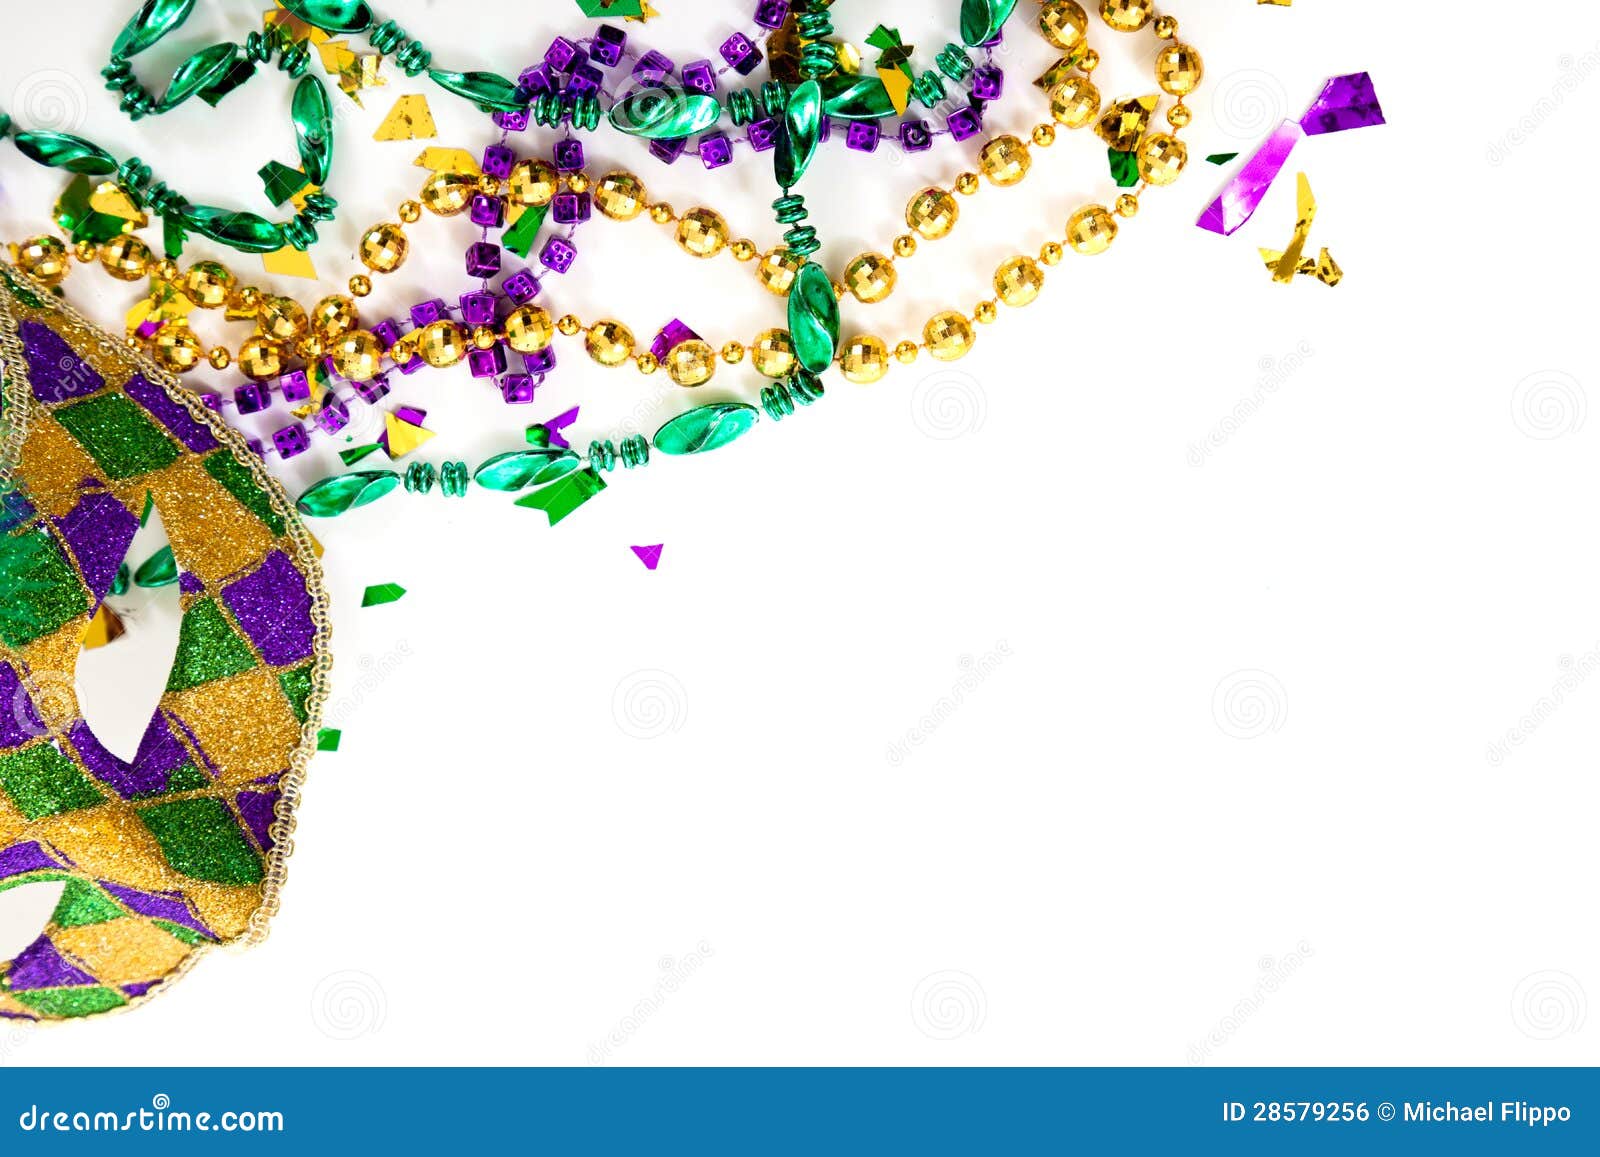 a mardi gras mask and beads on a white background with copy space